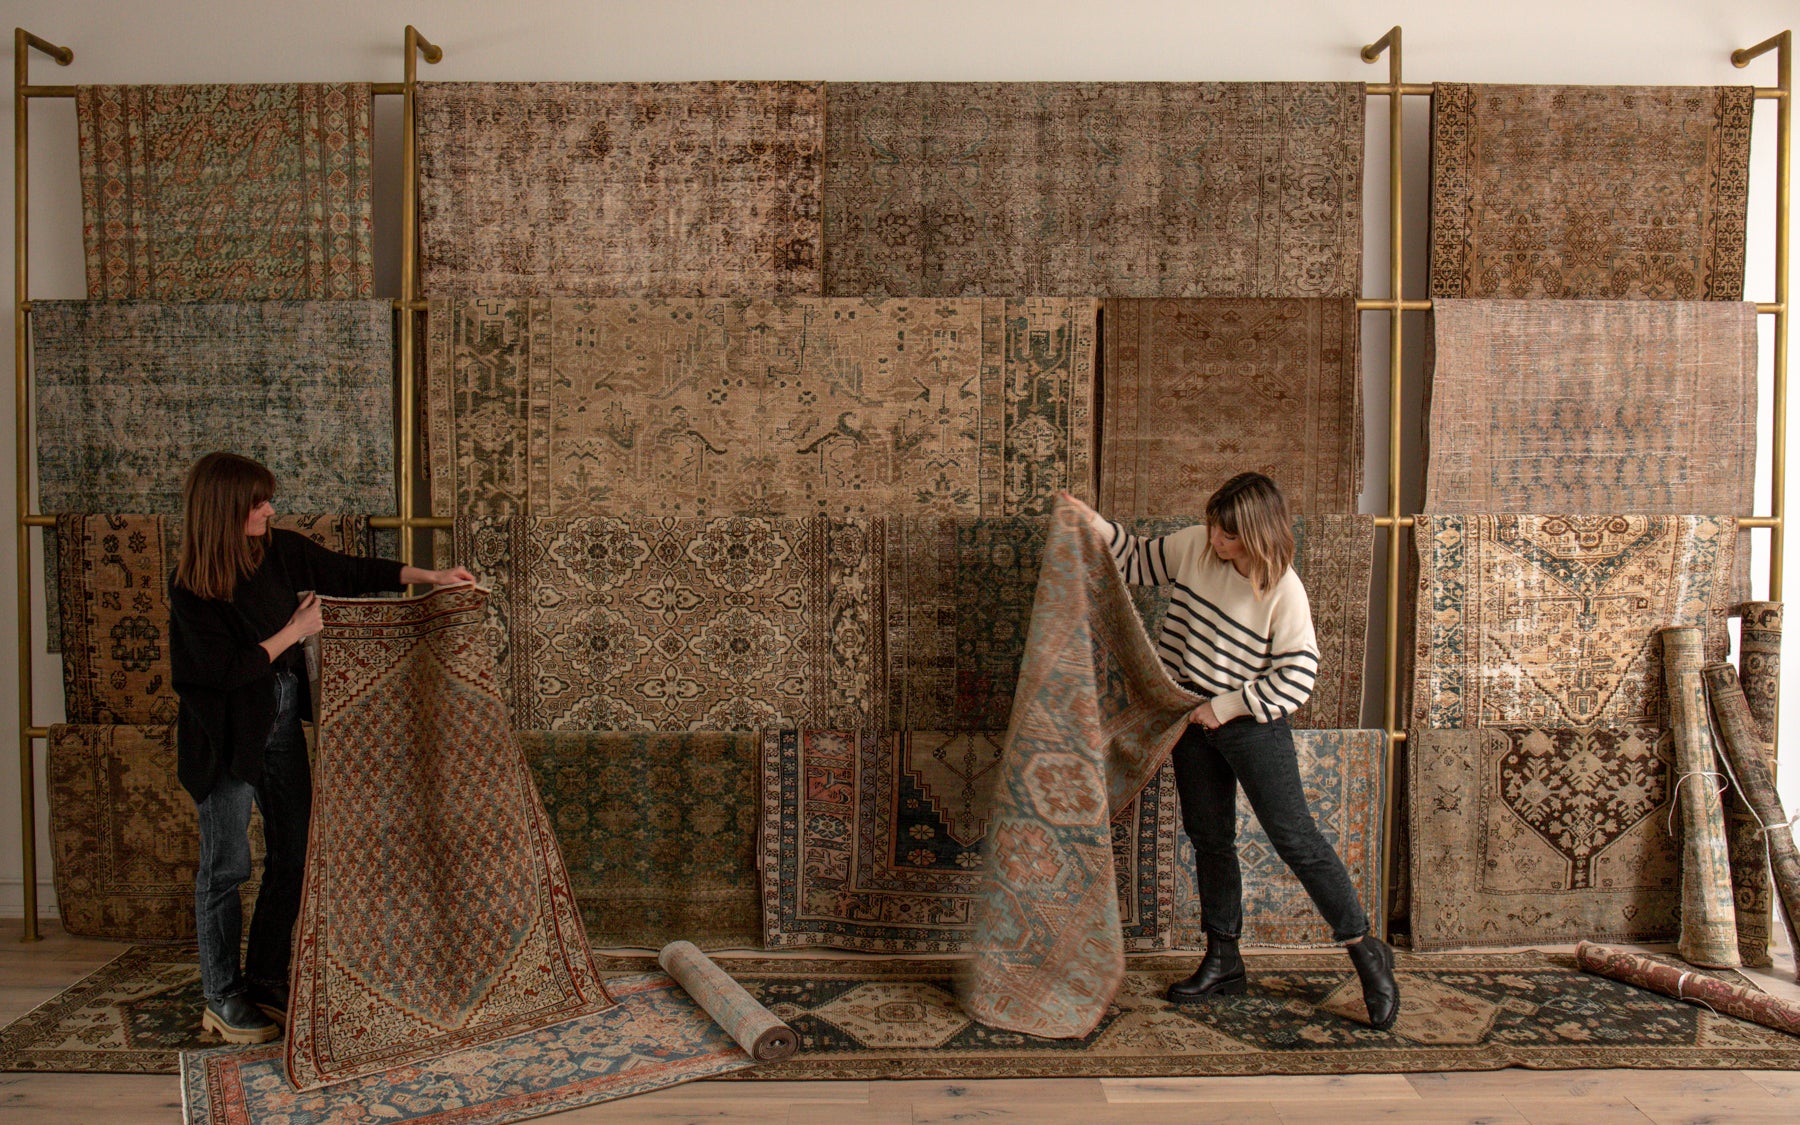 5 Tips for Keeping Area Rugs EXACTLY Where You Want Them. - Chris Loves  Julia